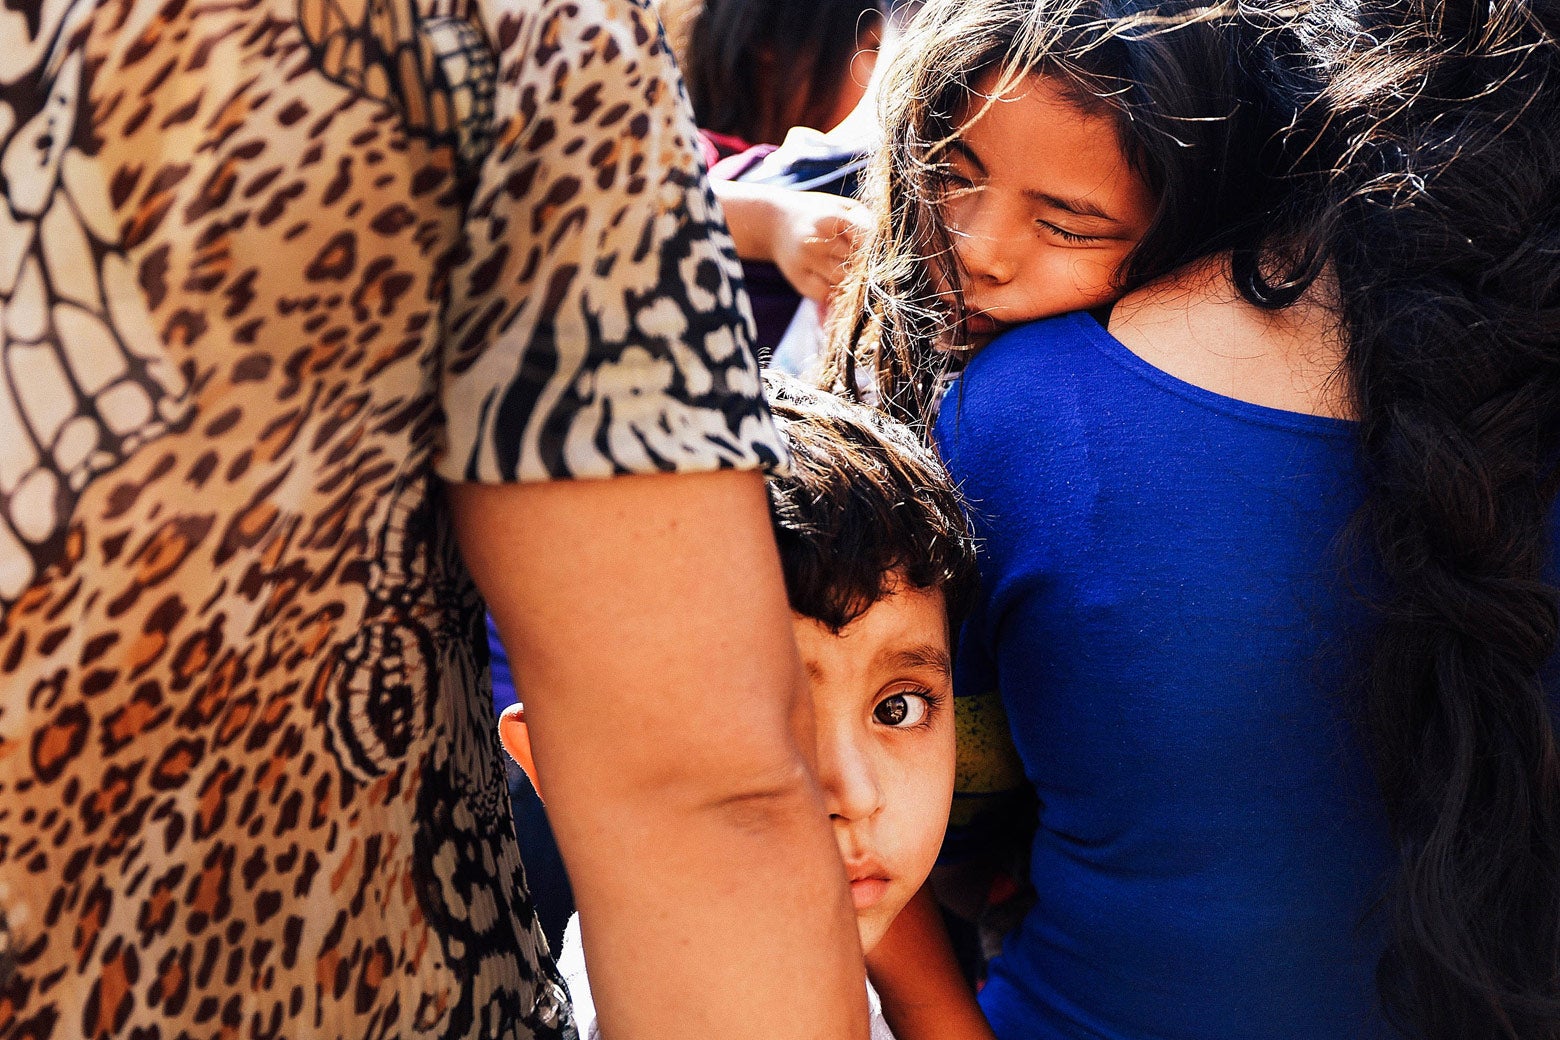 Immigrant families arrive at a Texas bus station.